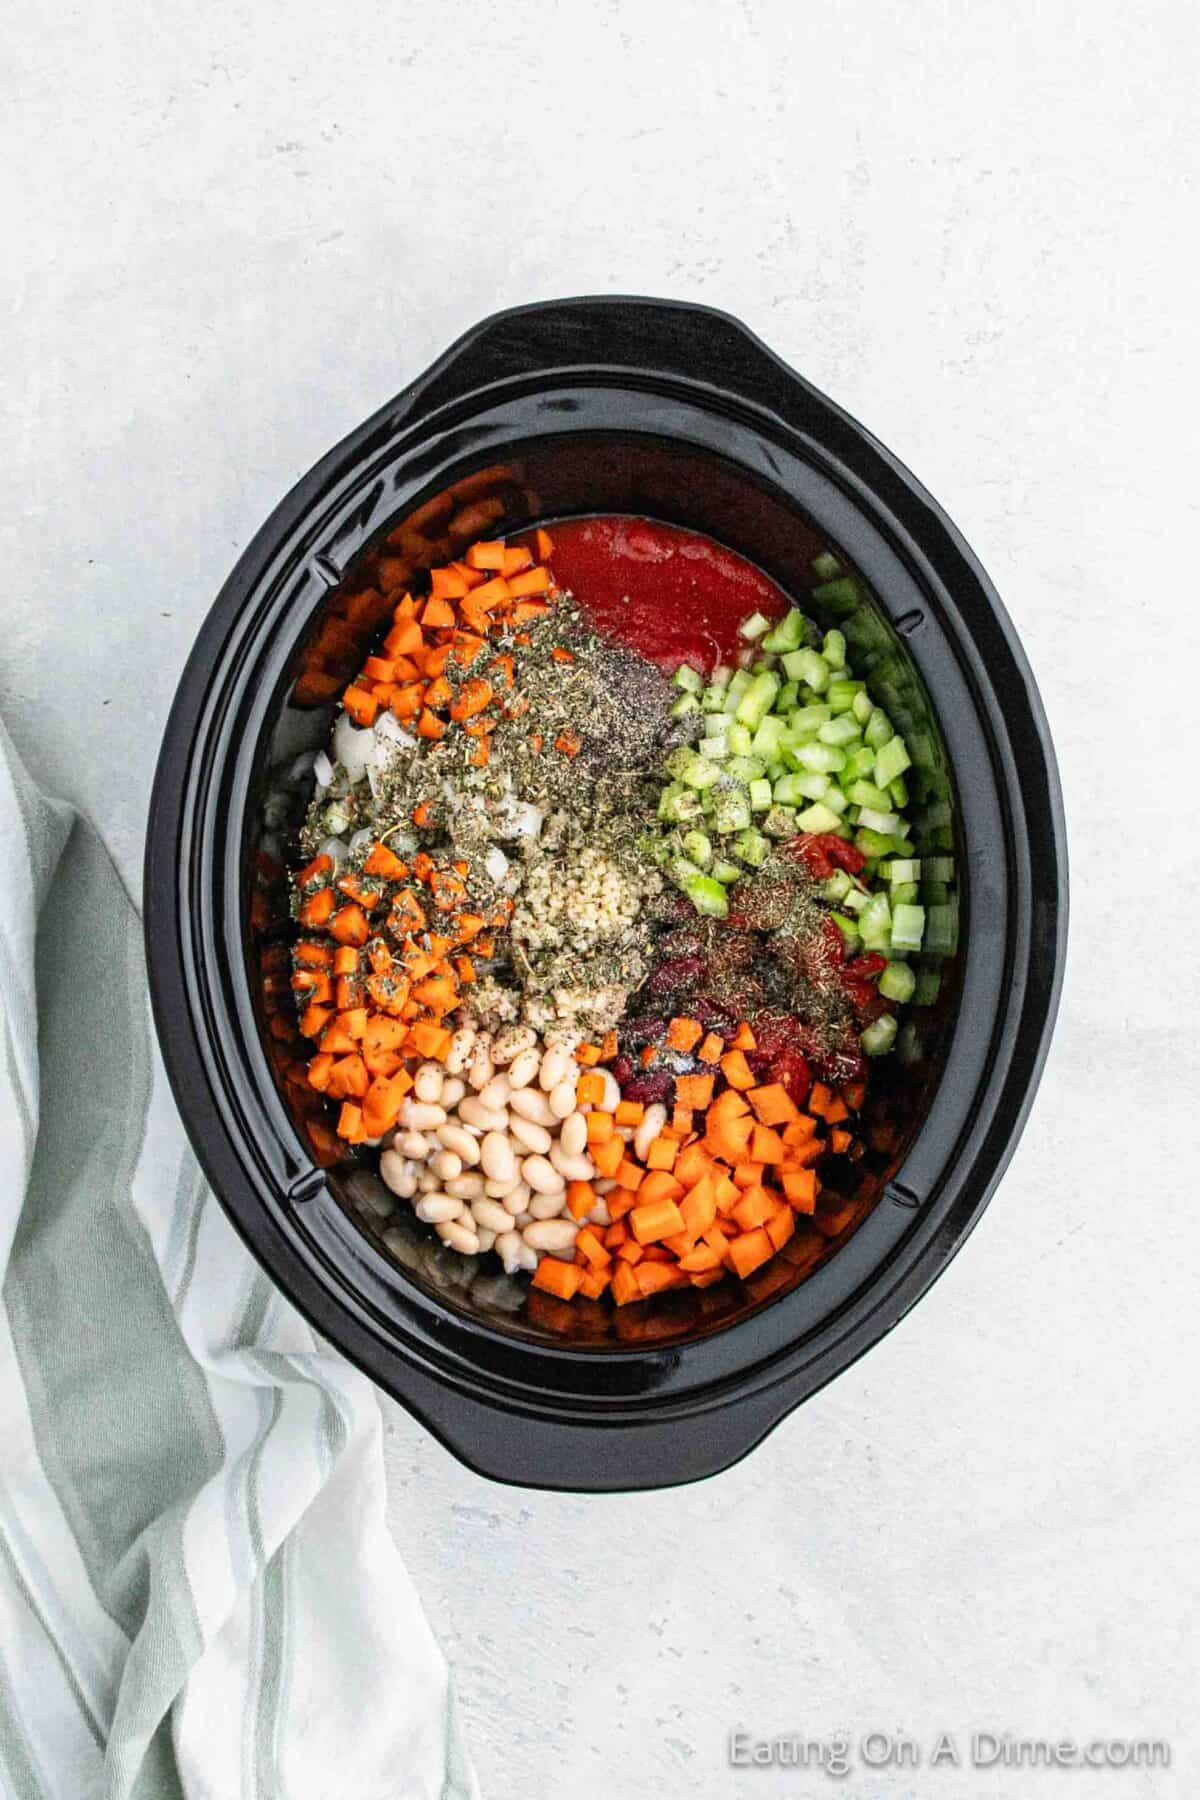 Adding ingredients to the slow cooker